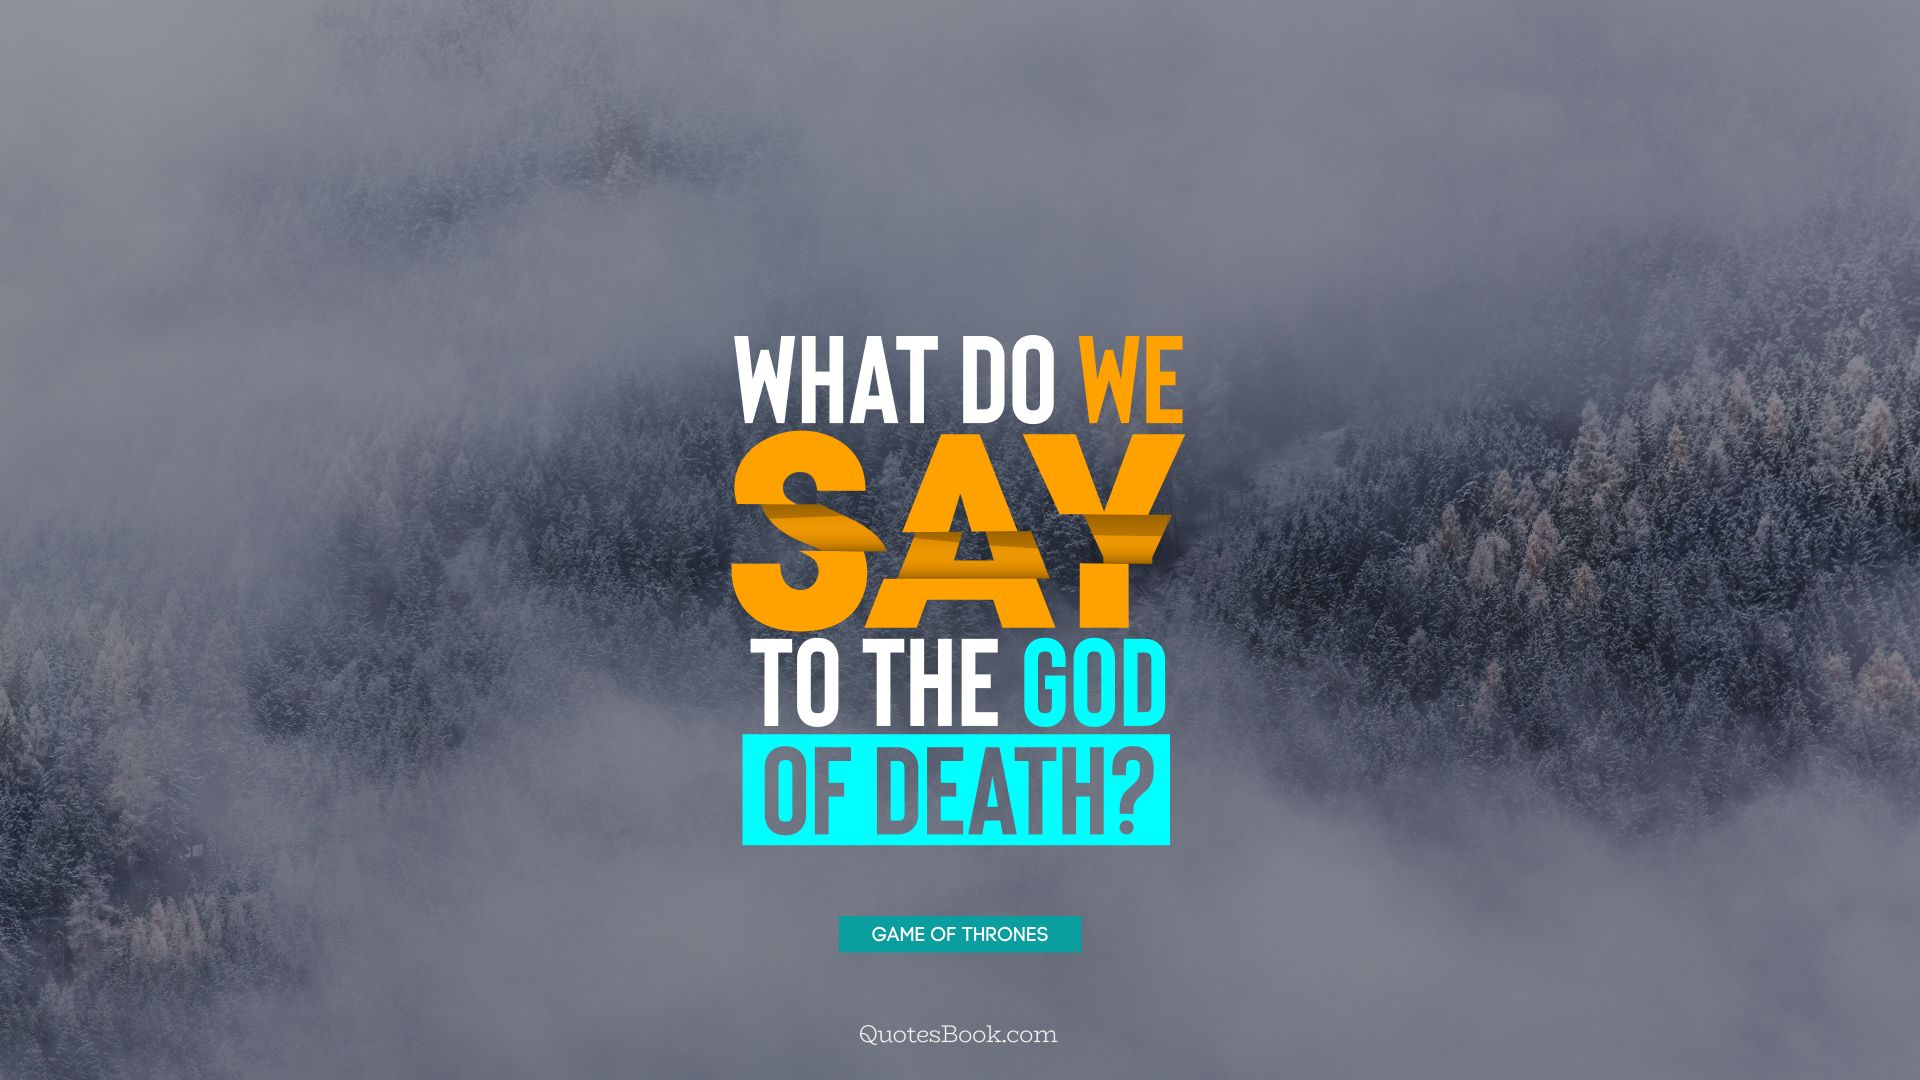 What Do We Say To The God Of Death - Poster - HD Wallpaper 